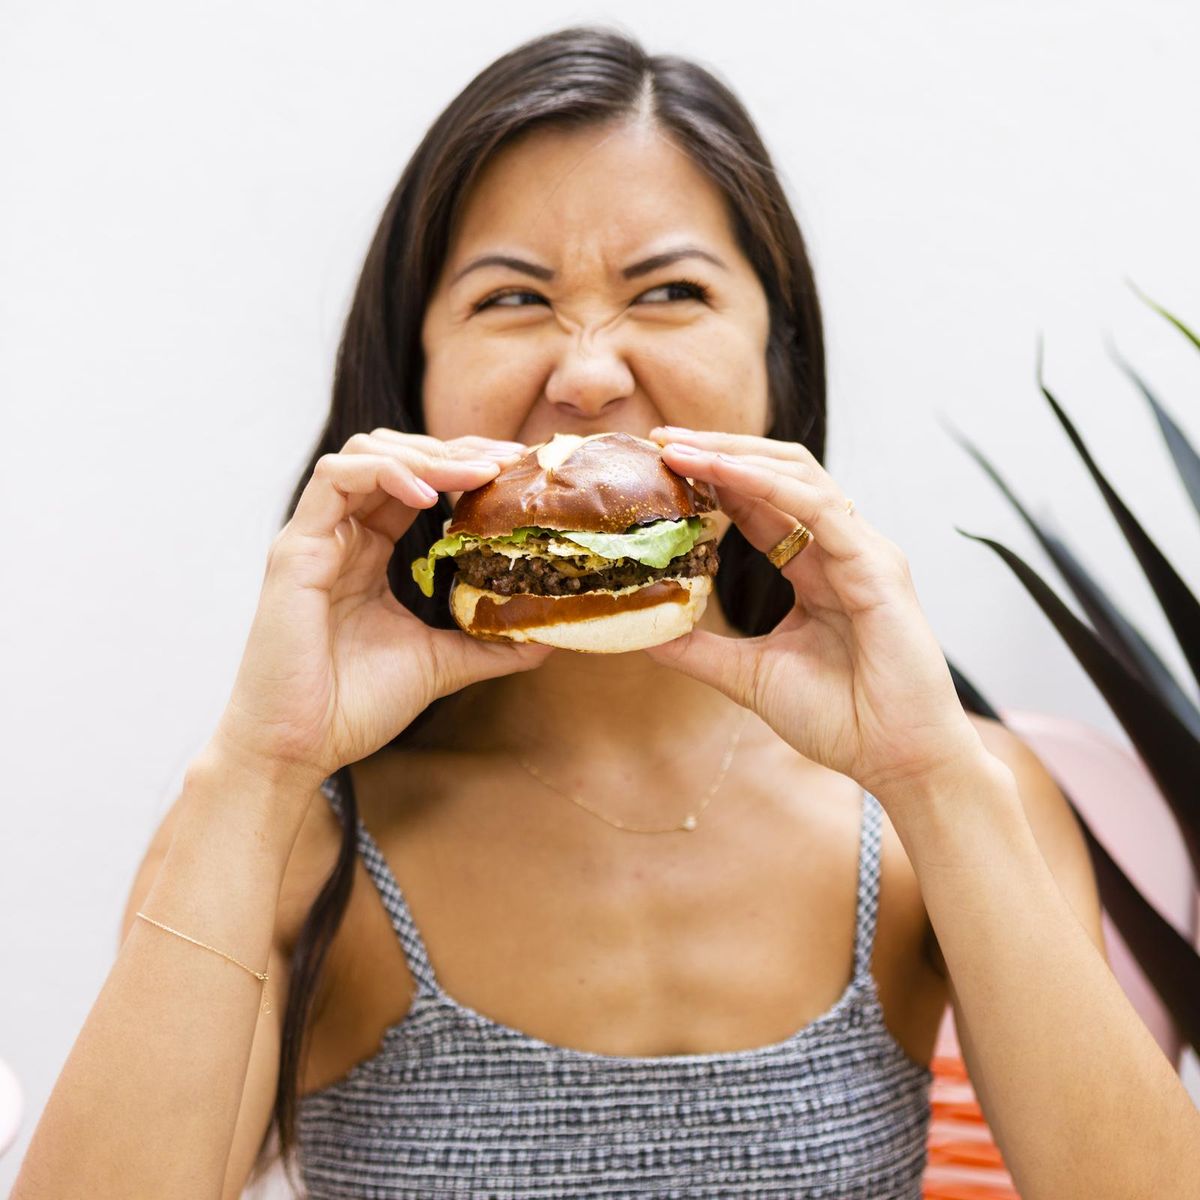 healthy food that you should actually avoid soy burgers